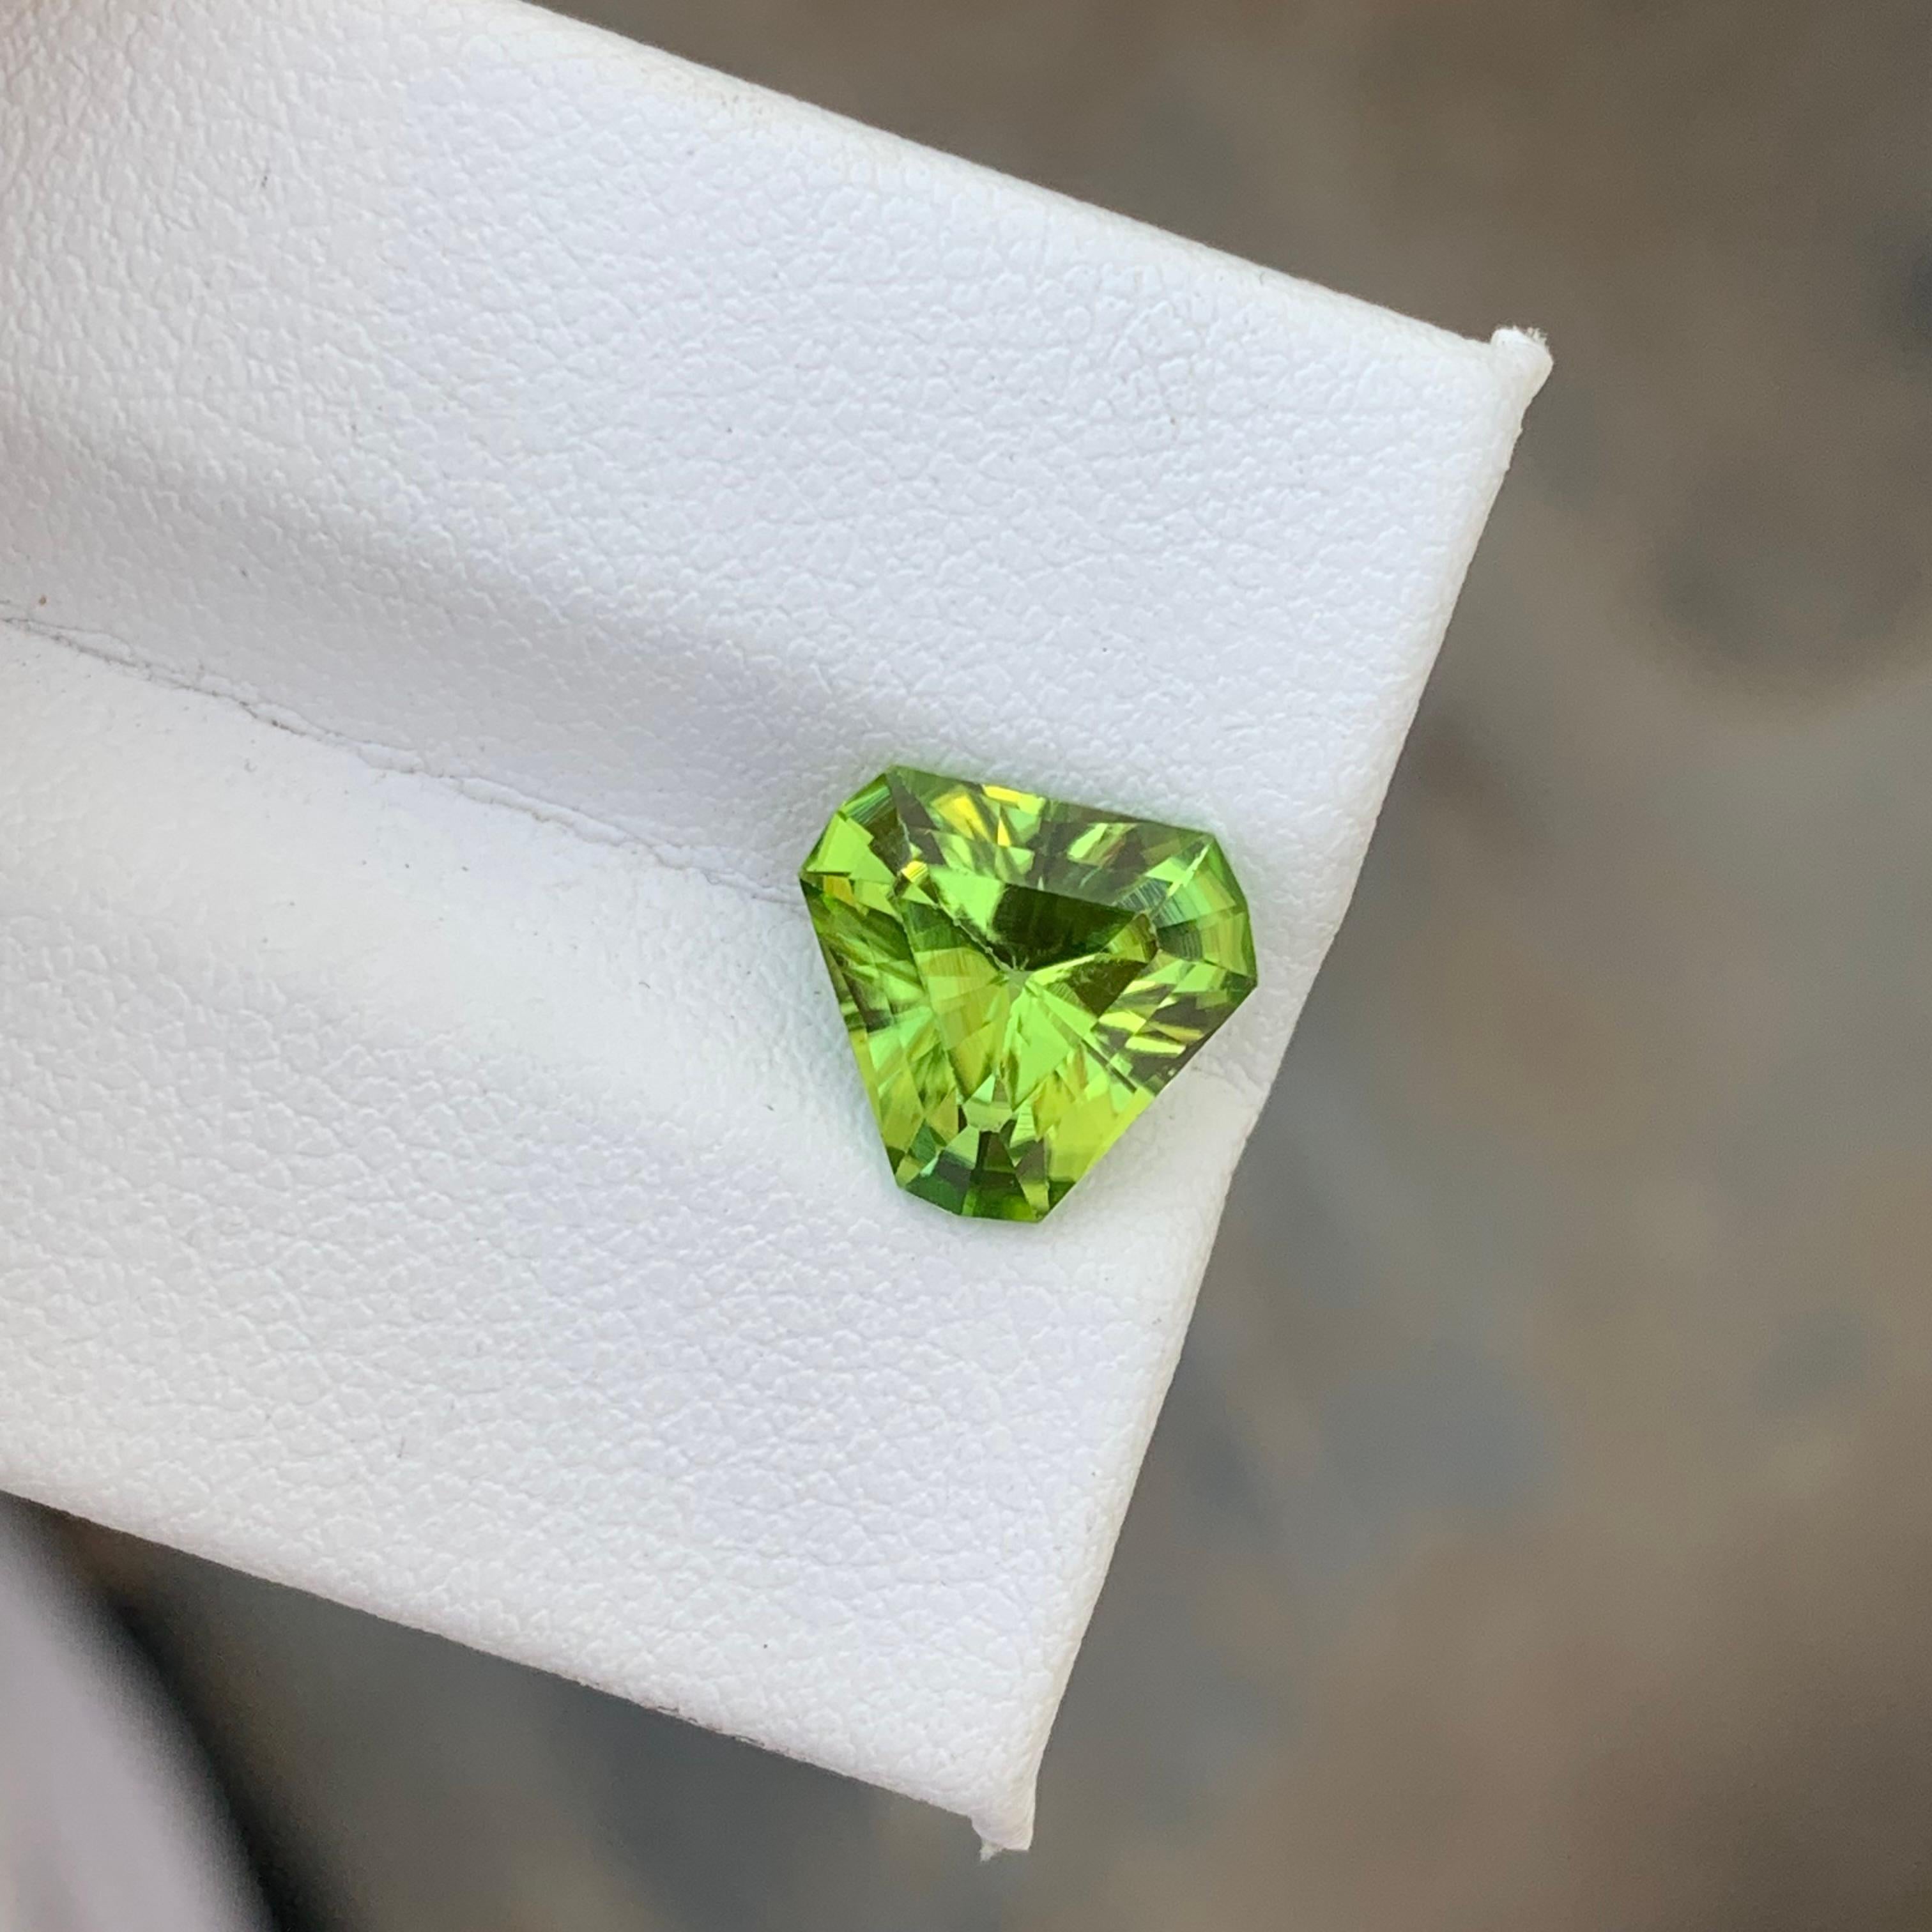 Belle Époque 2.70 Carat Natural Loose Green Peridot with Trilliant Shape from Suppat Valley For Sale